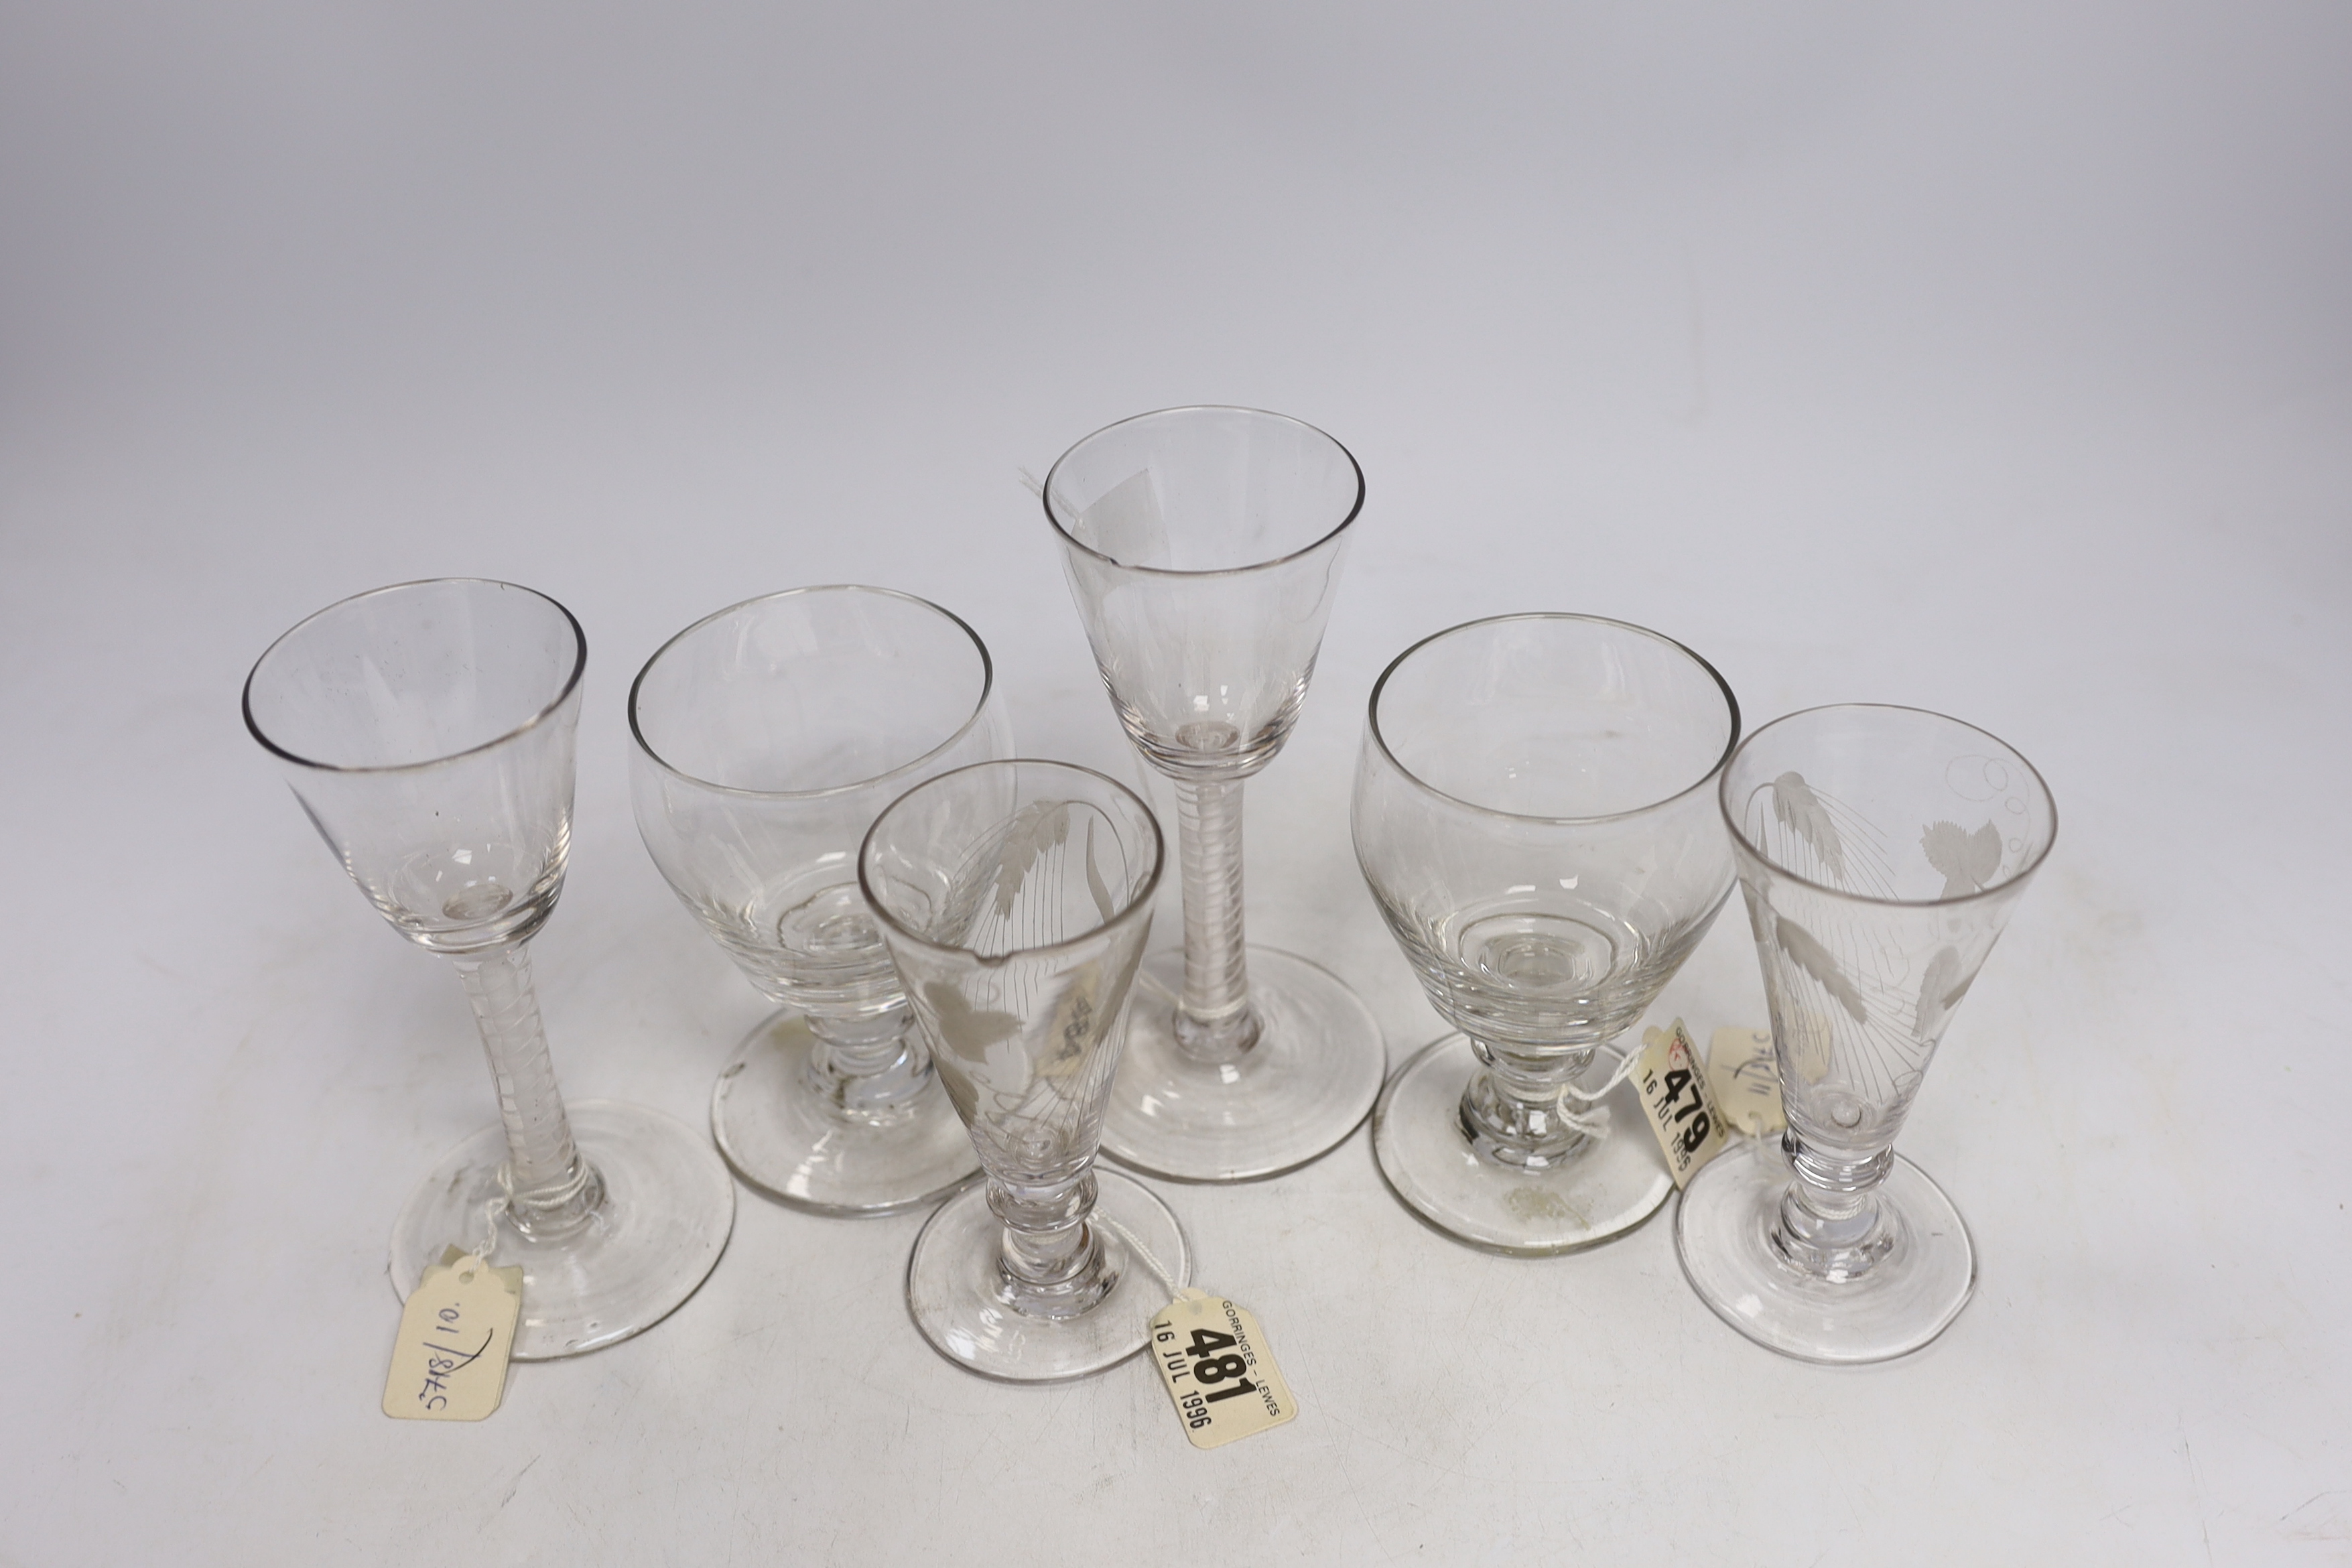 Two late 18th century DSOT Wine glasses, two dwarf ale glasses with engraved hops and barley, and - Image 4 of 4